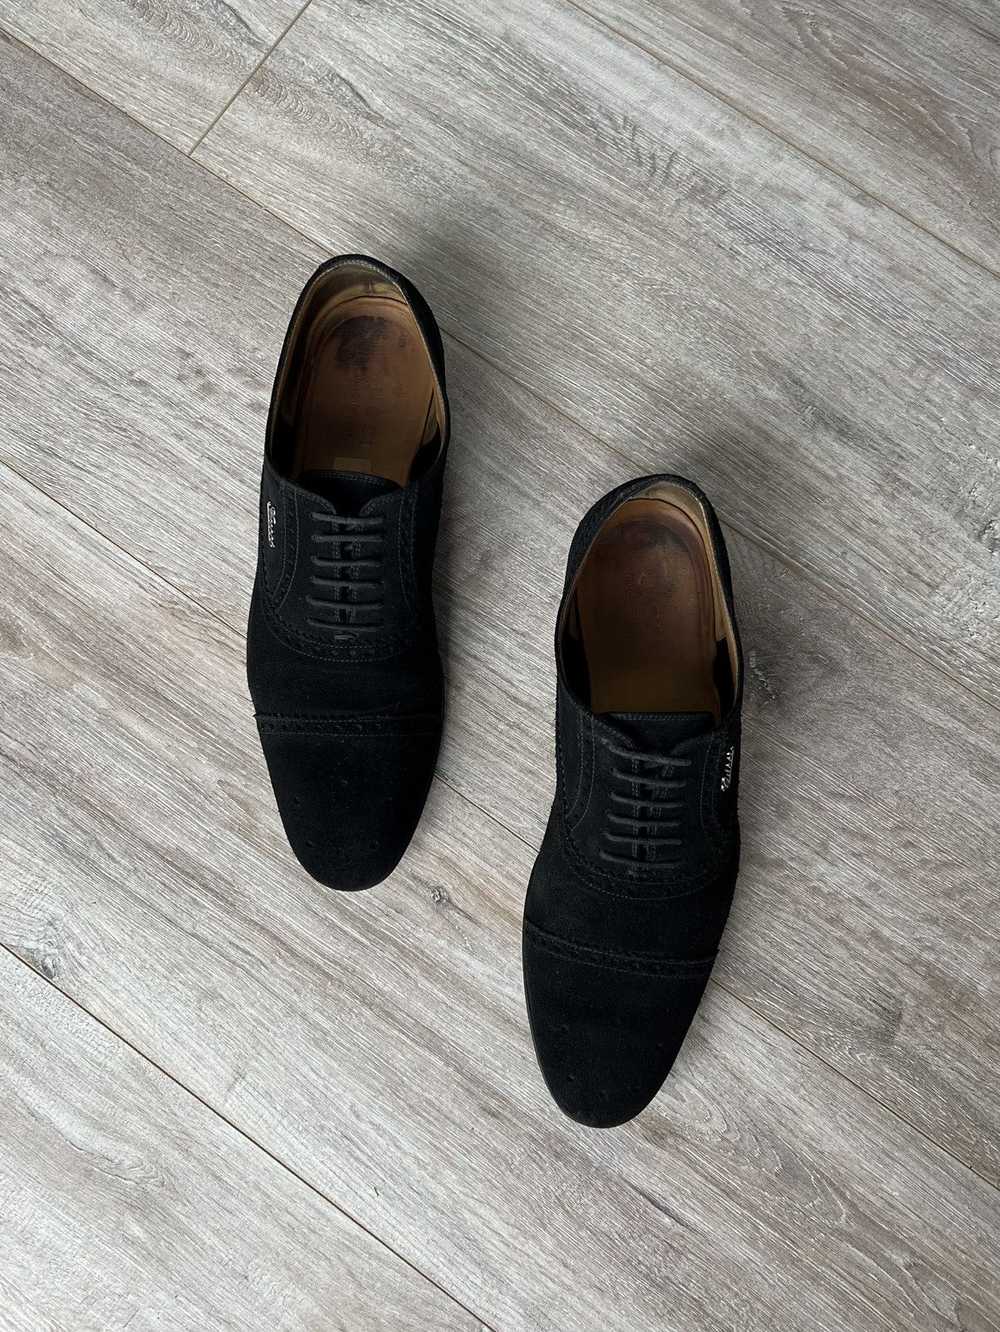 Gucci GUCCI Shoes Oxfords Brogues Suede Lace Up M… - image 4